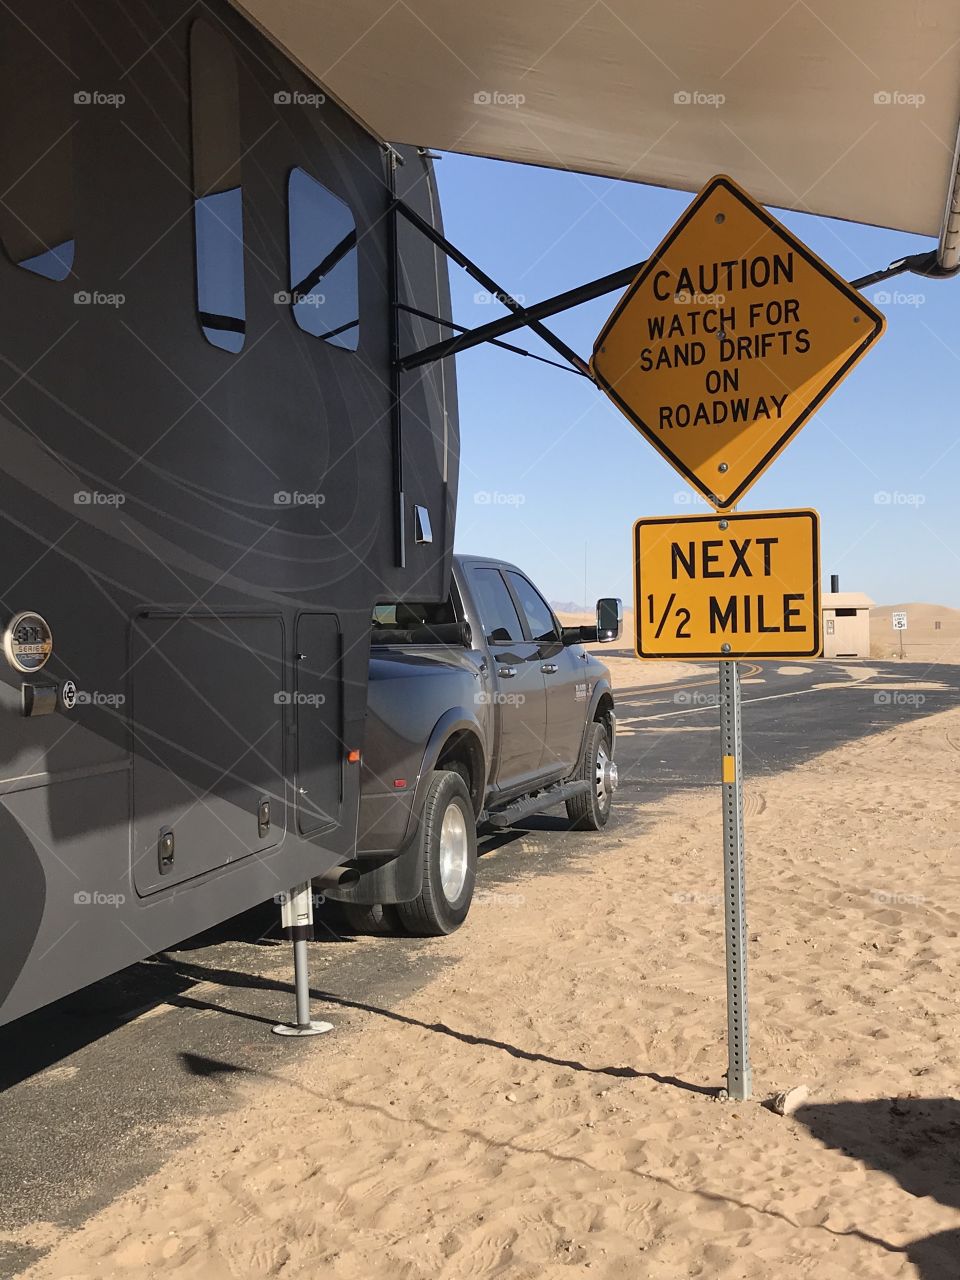 Cping at Imperial Sand Dunes - California